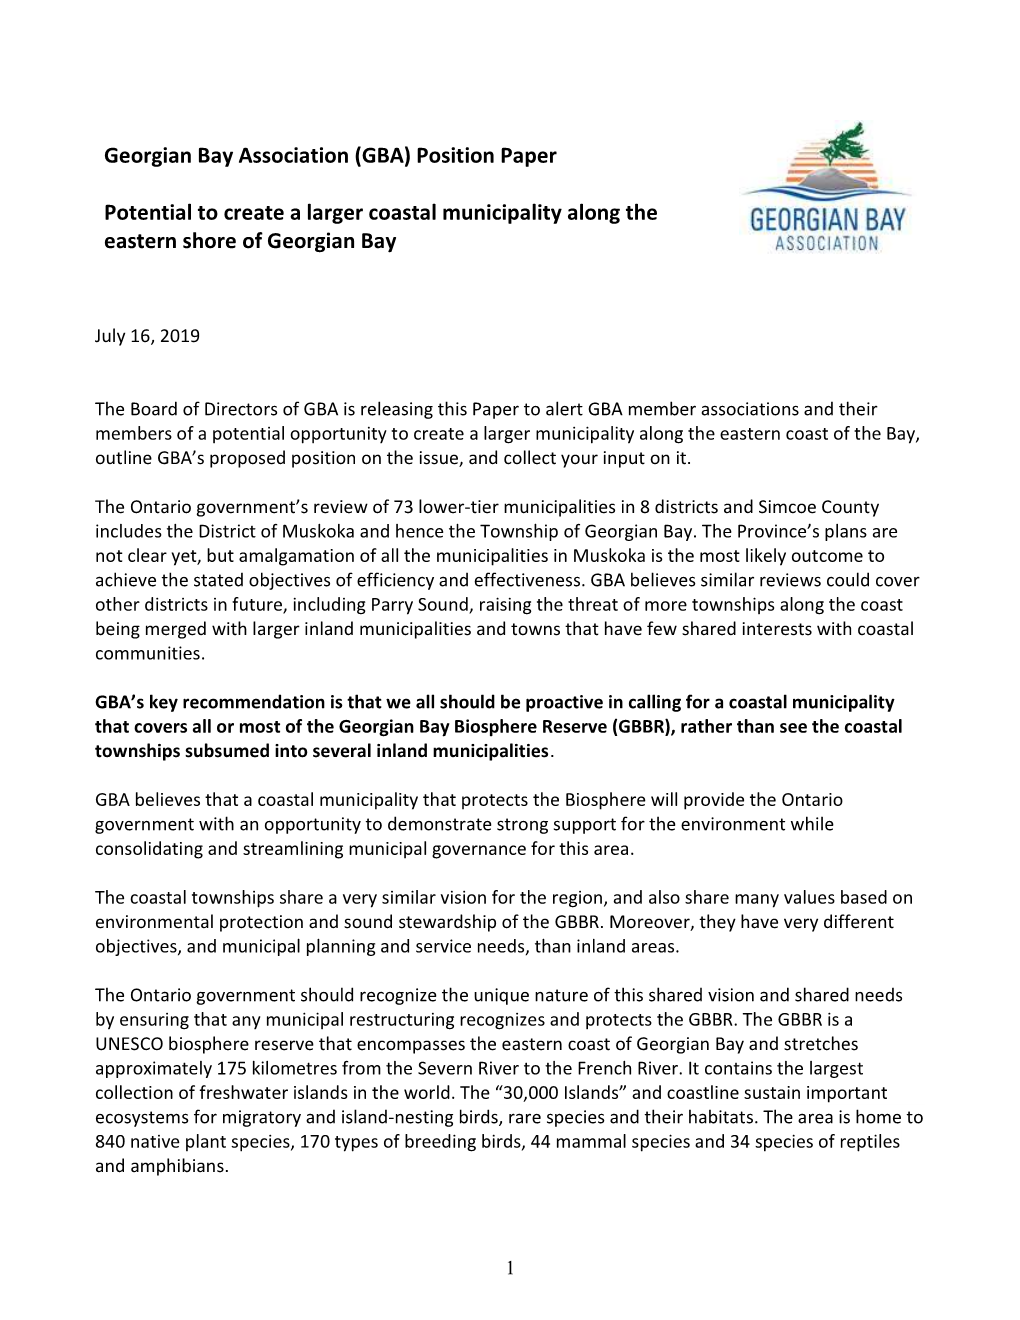 Georgian Bay Association (GBA) Position Paper Potential to Create a Larger Coastal Municipality Along the Eastern Shore of Geor